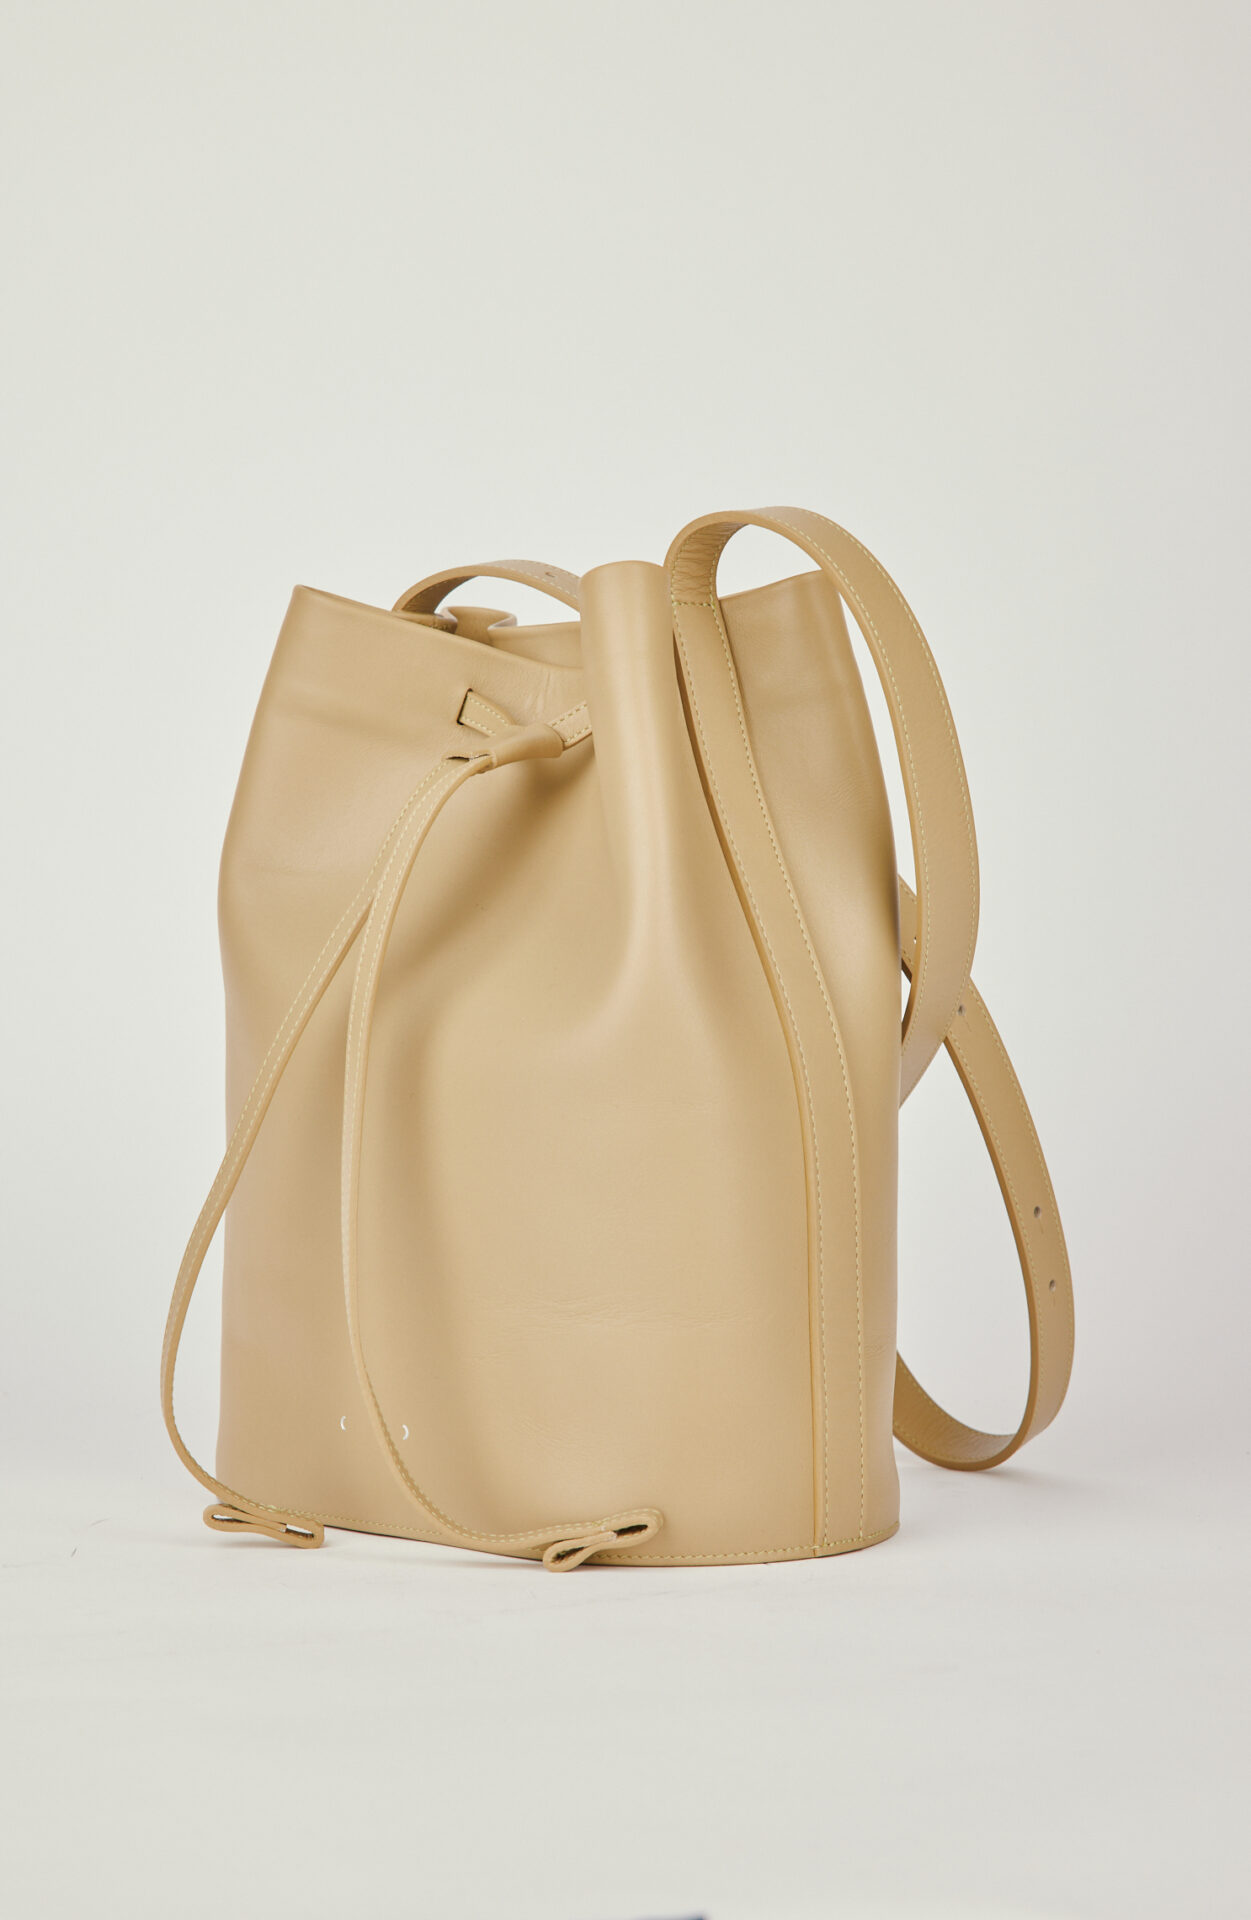 Olive green leather bucket bag "AB 103.1